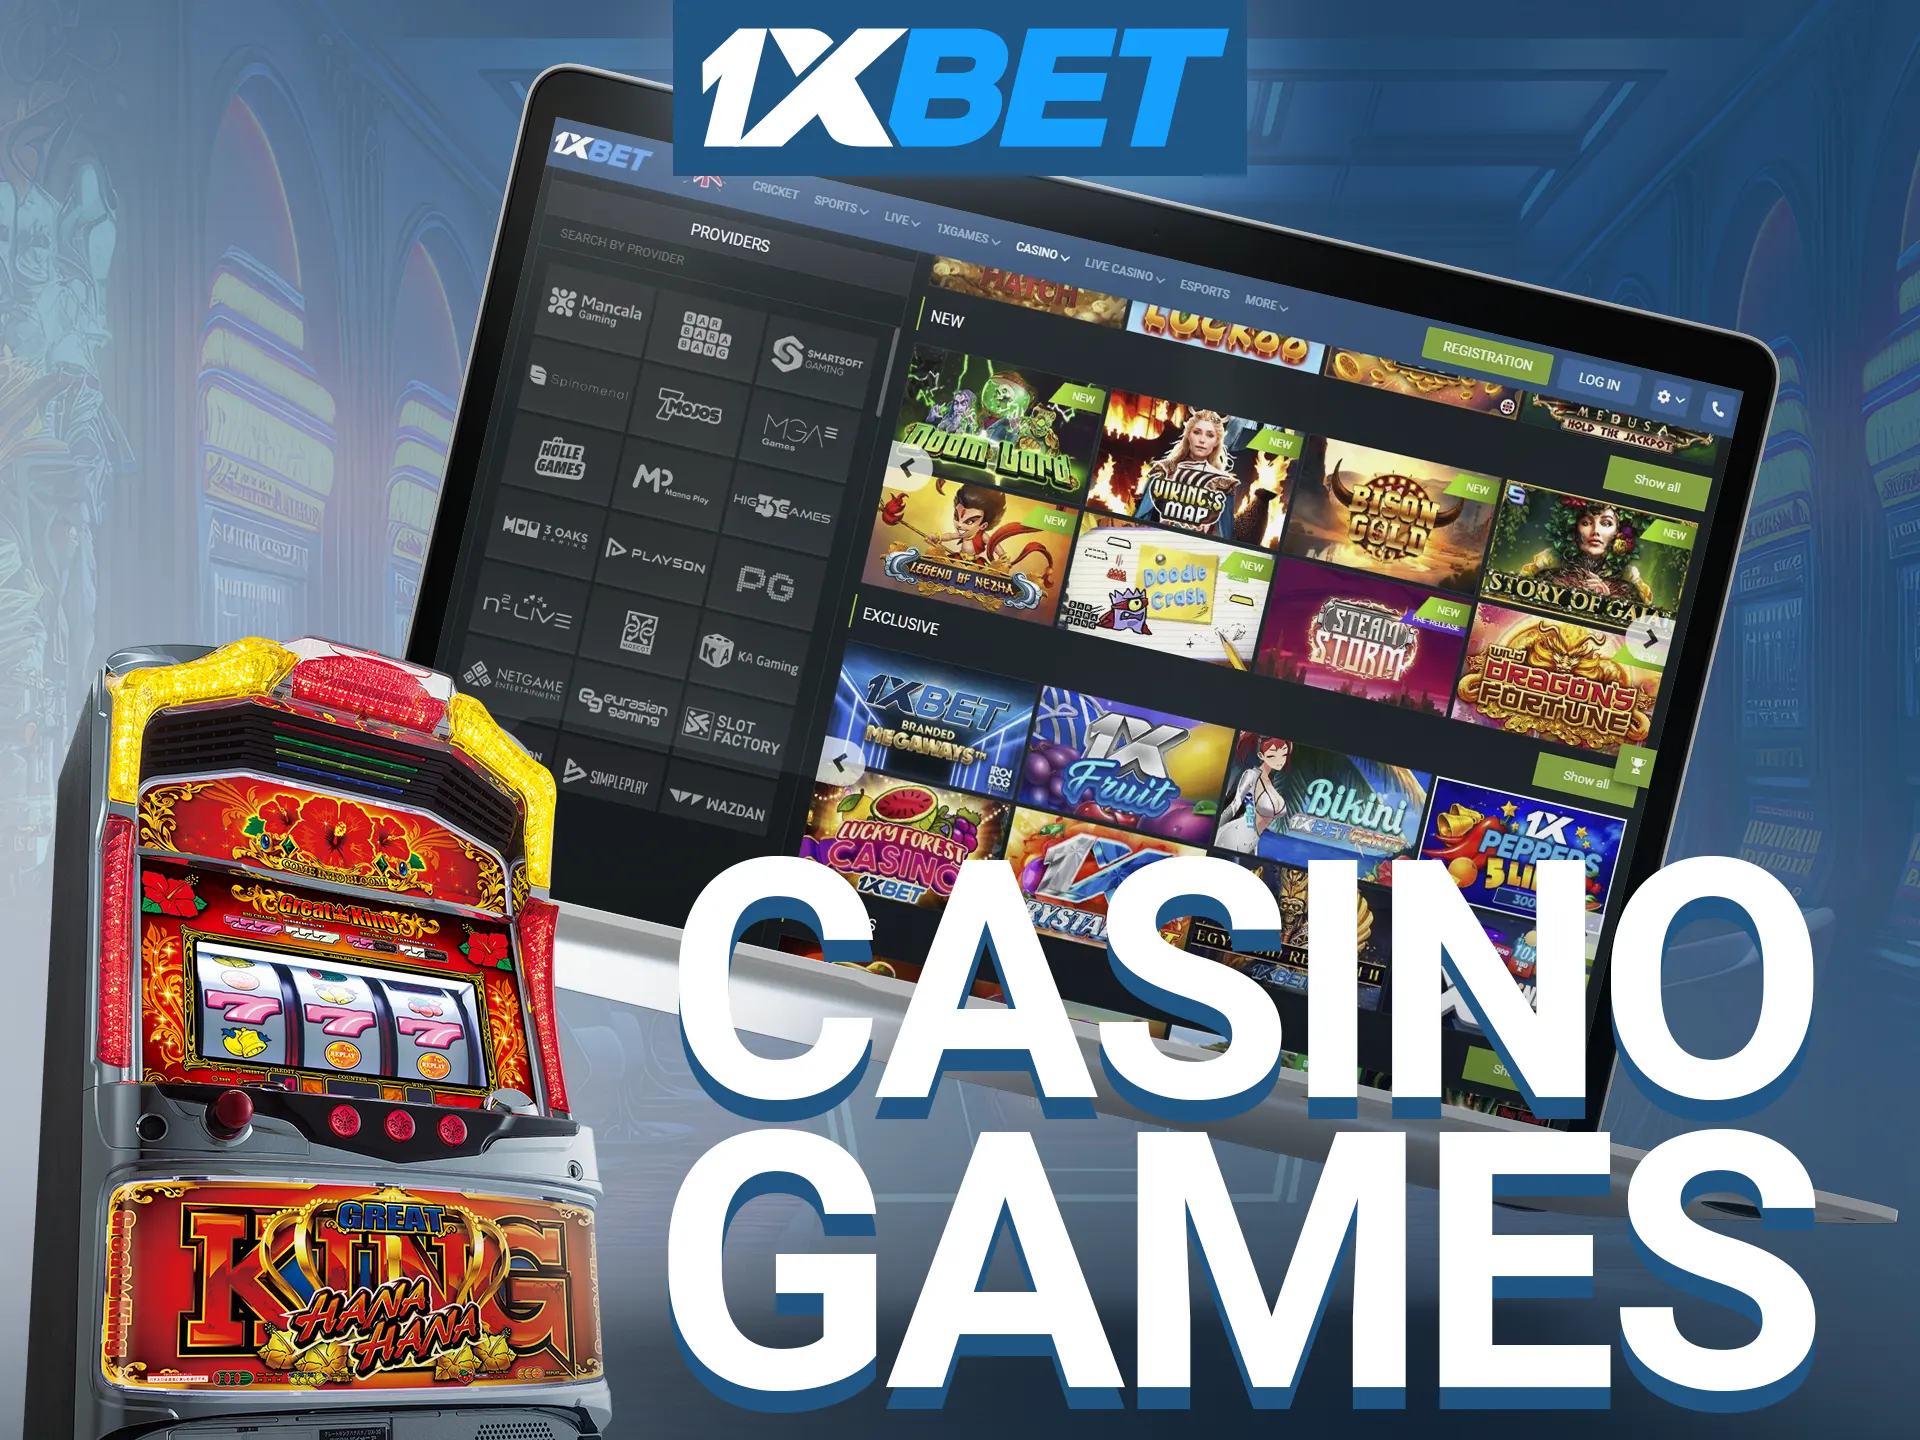 1xBet features over 2,000 games from leading software providers.